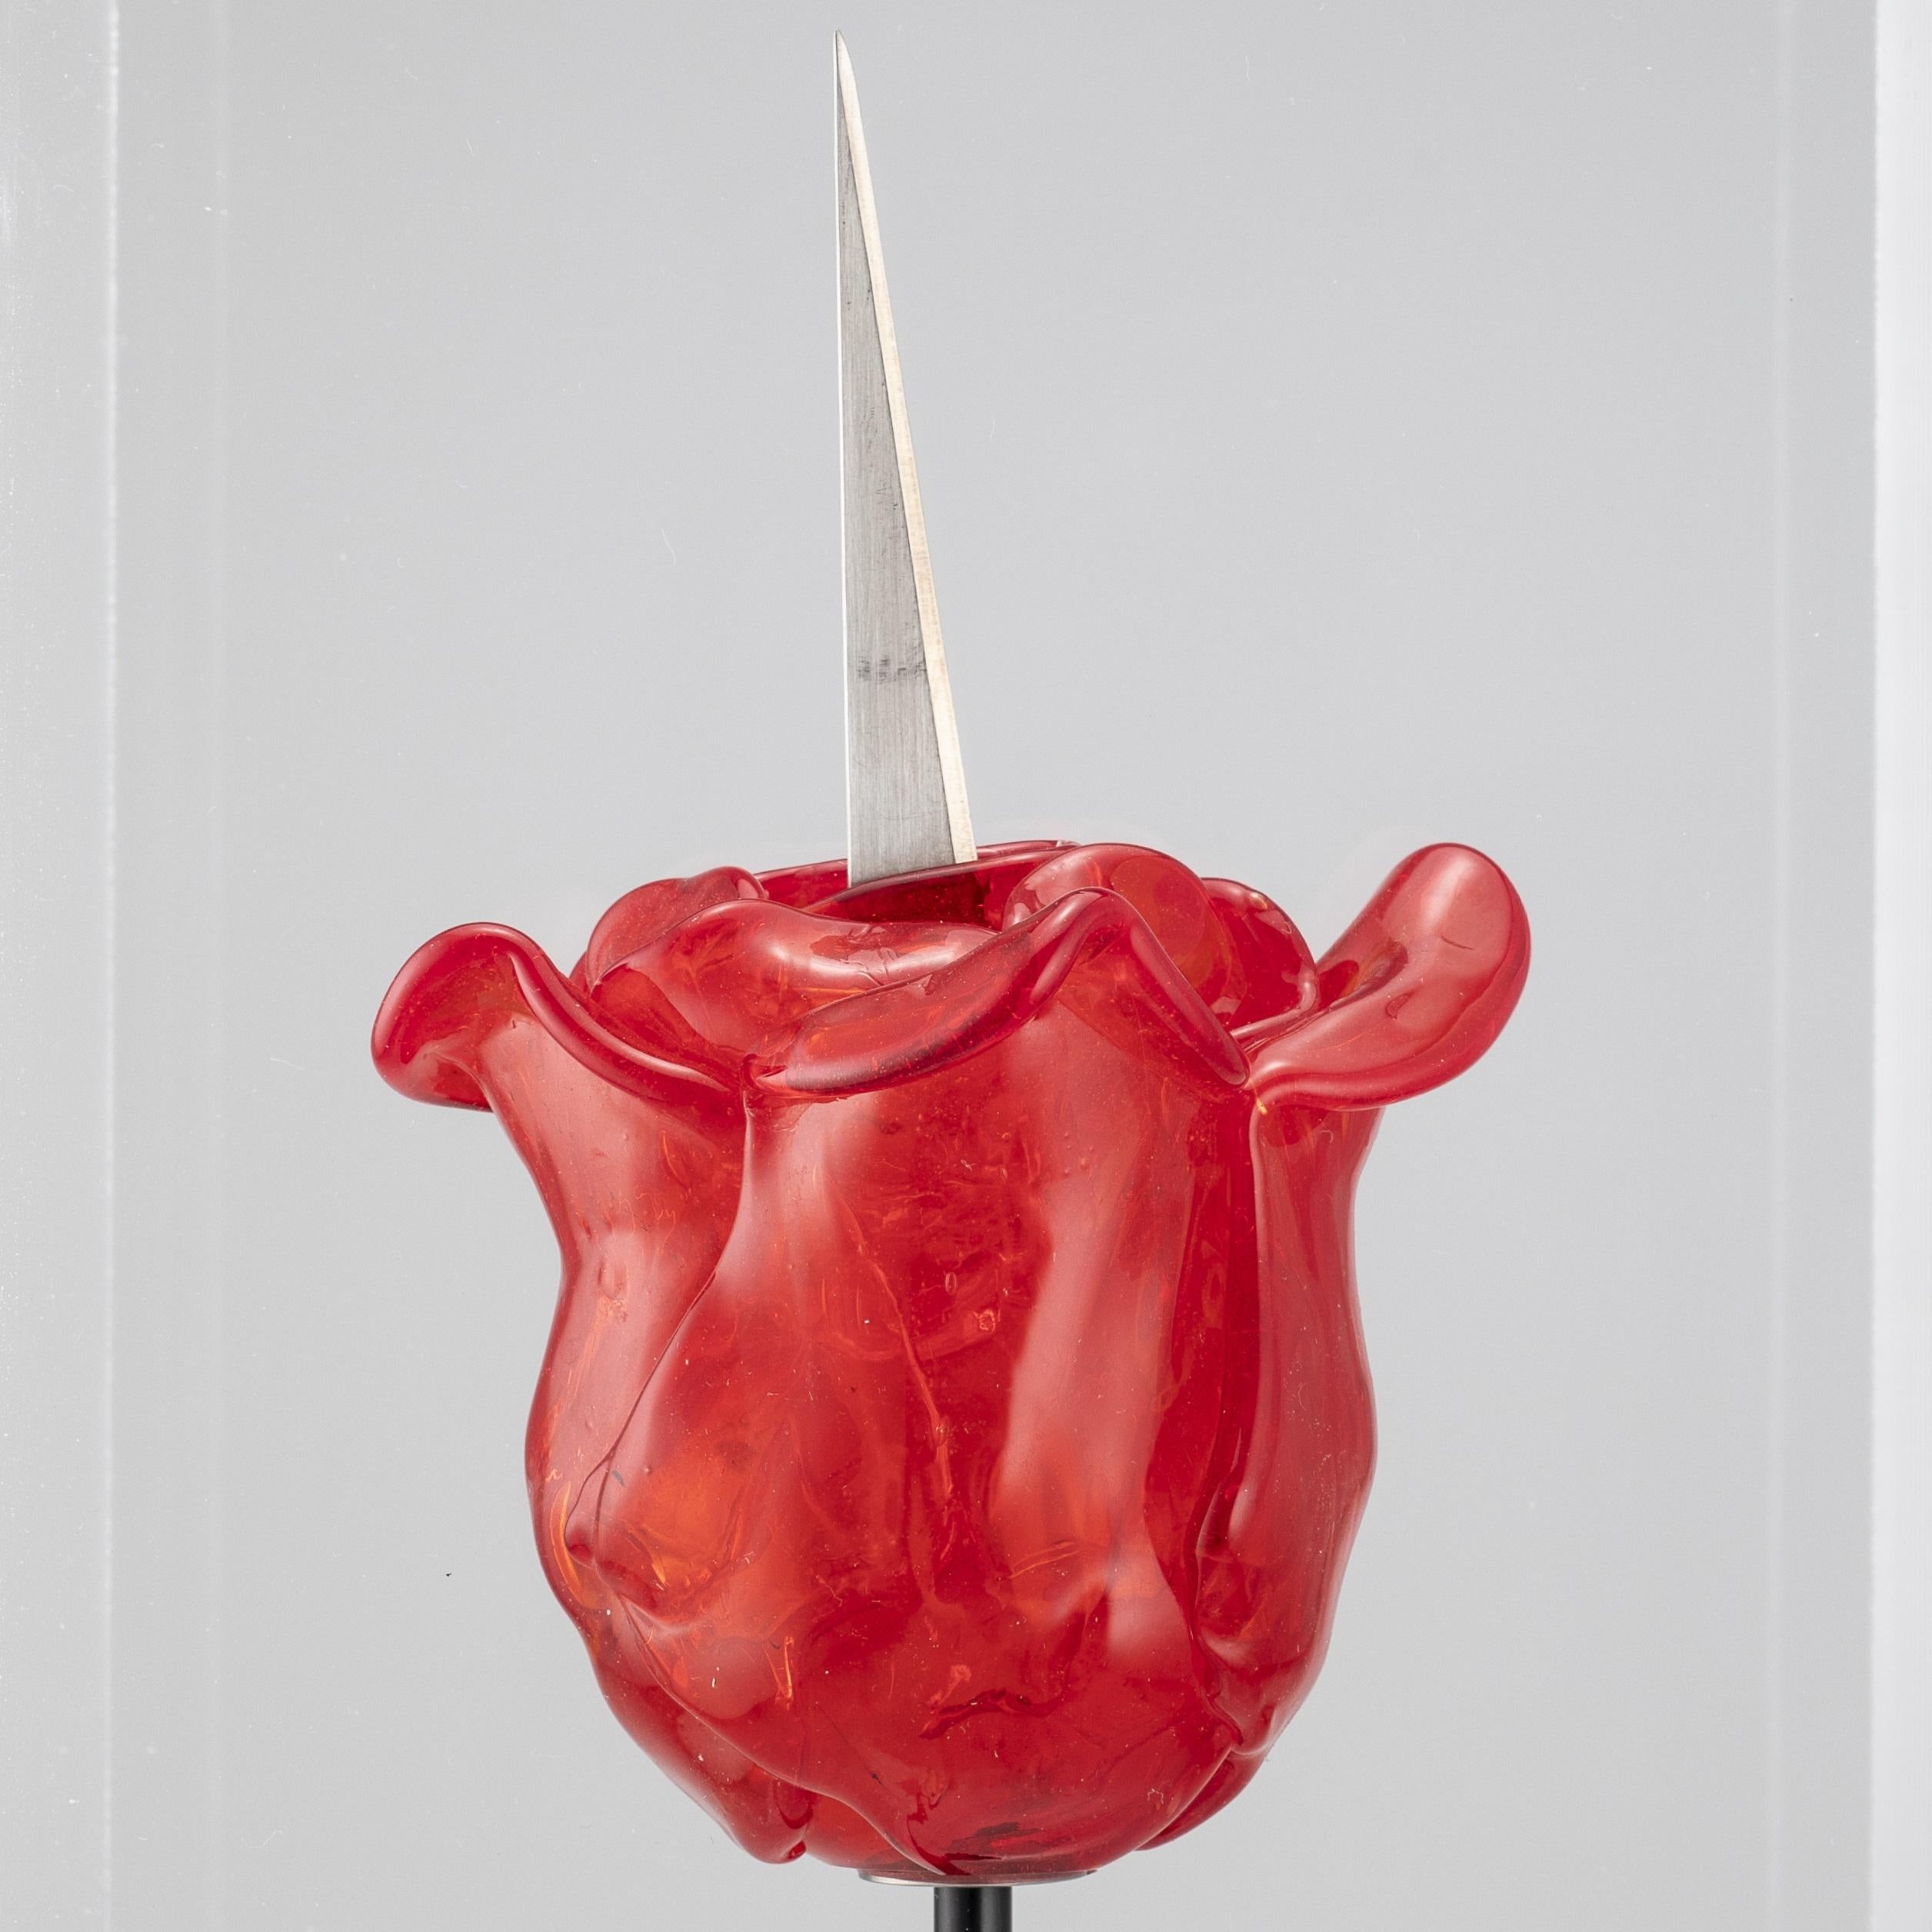 A continuation of her evocative Venice Biennale's installation, Bertlmann creates this sculpture as a symbol of both attractiveness and strength.

Knife-rose by Renate Bertlmann 
Murano glass and metal, protected by acrylic case
Edition of 50, plus